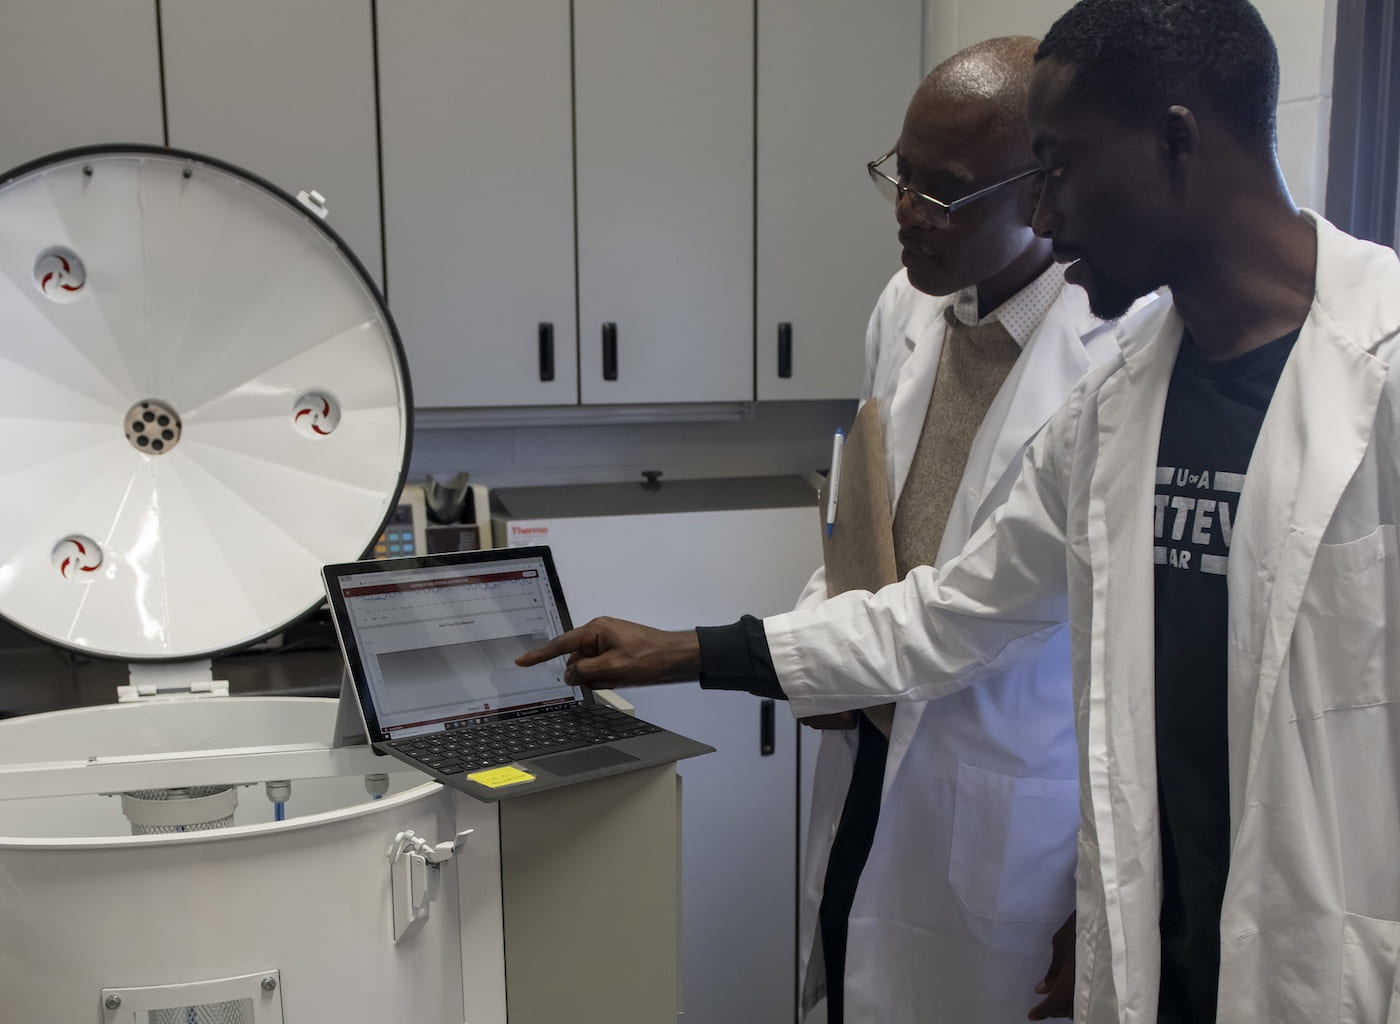 CARBON DIOXIDE SENSORS — Griffiths Atungulu, left, director of the Rice Processing Program, works with Samuel Olaoni, Ph.D. student, on a miniature grain bin to test carbon dioxide sensors for monitoring grain quality. (U of A System Division of Agriculture photo)